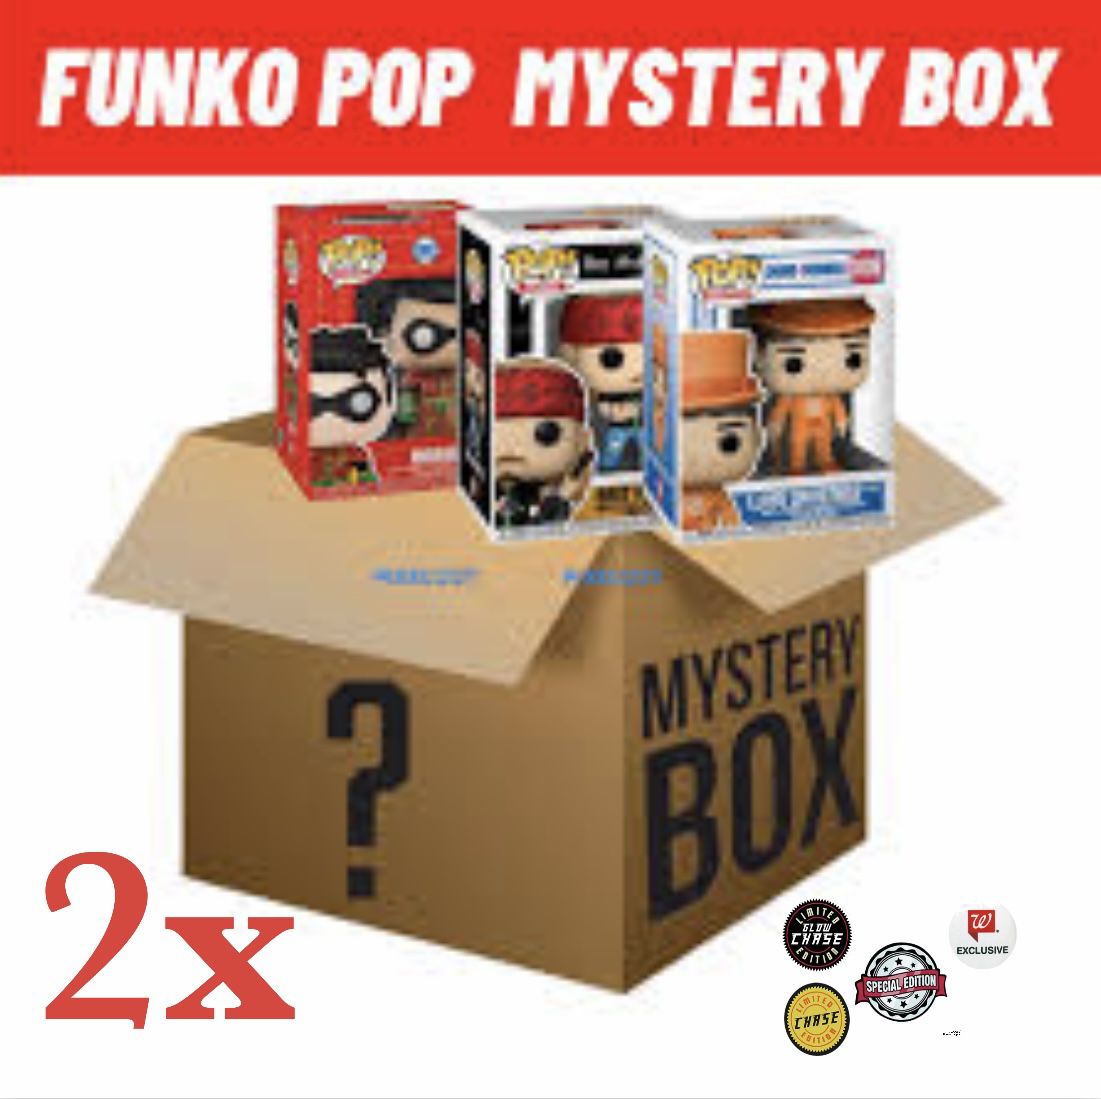 Funko Pop Mystery Box 2 Pops Included Exclusive Chance!!!